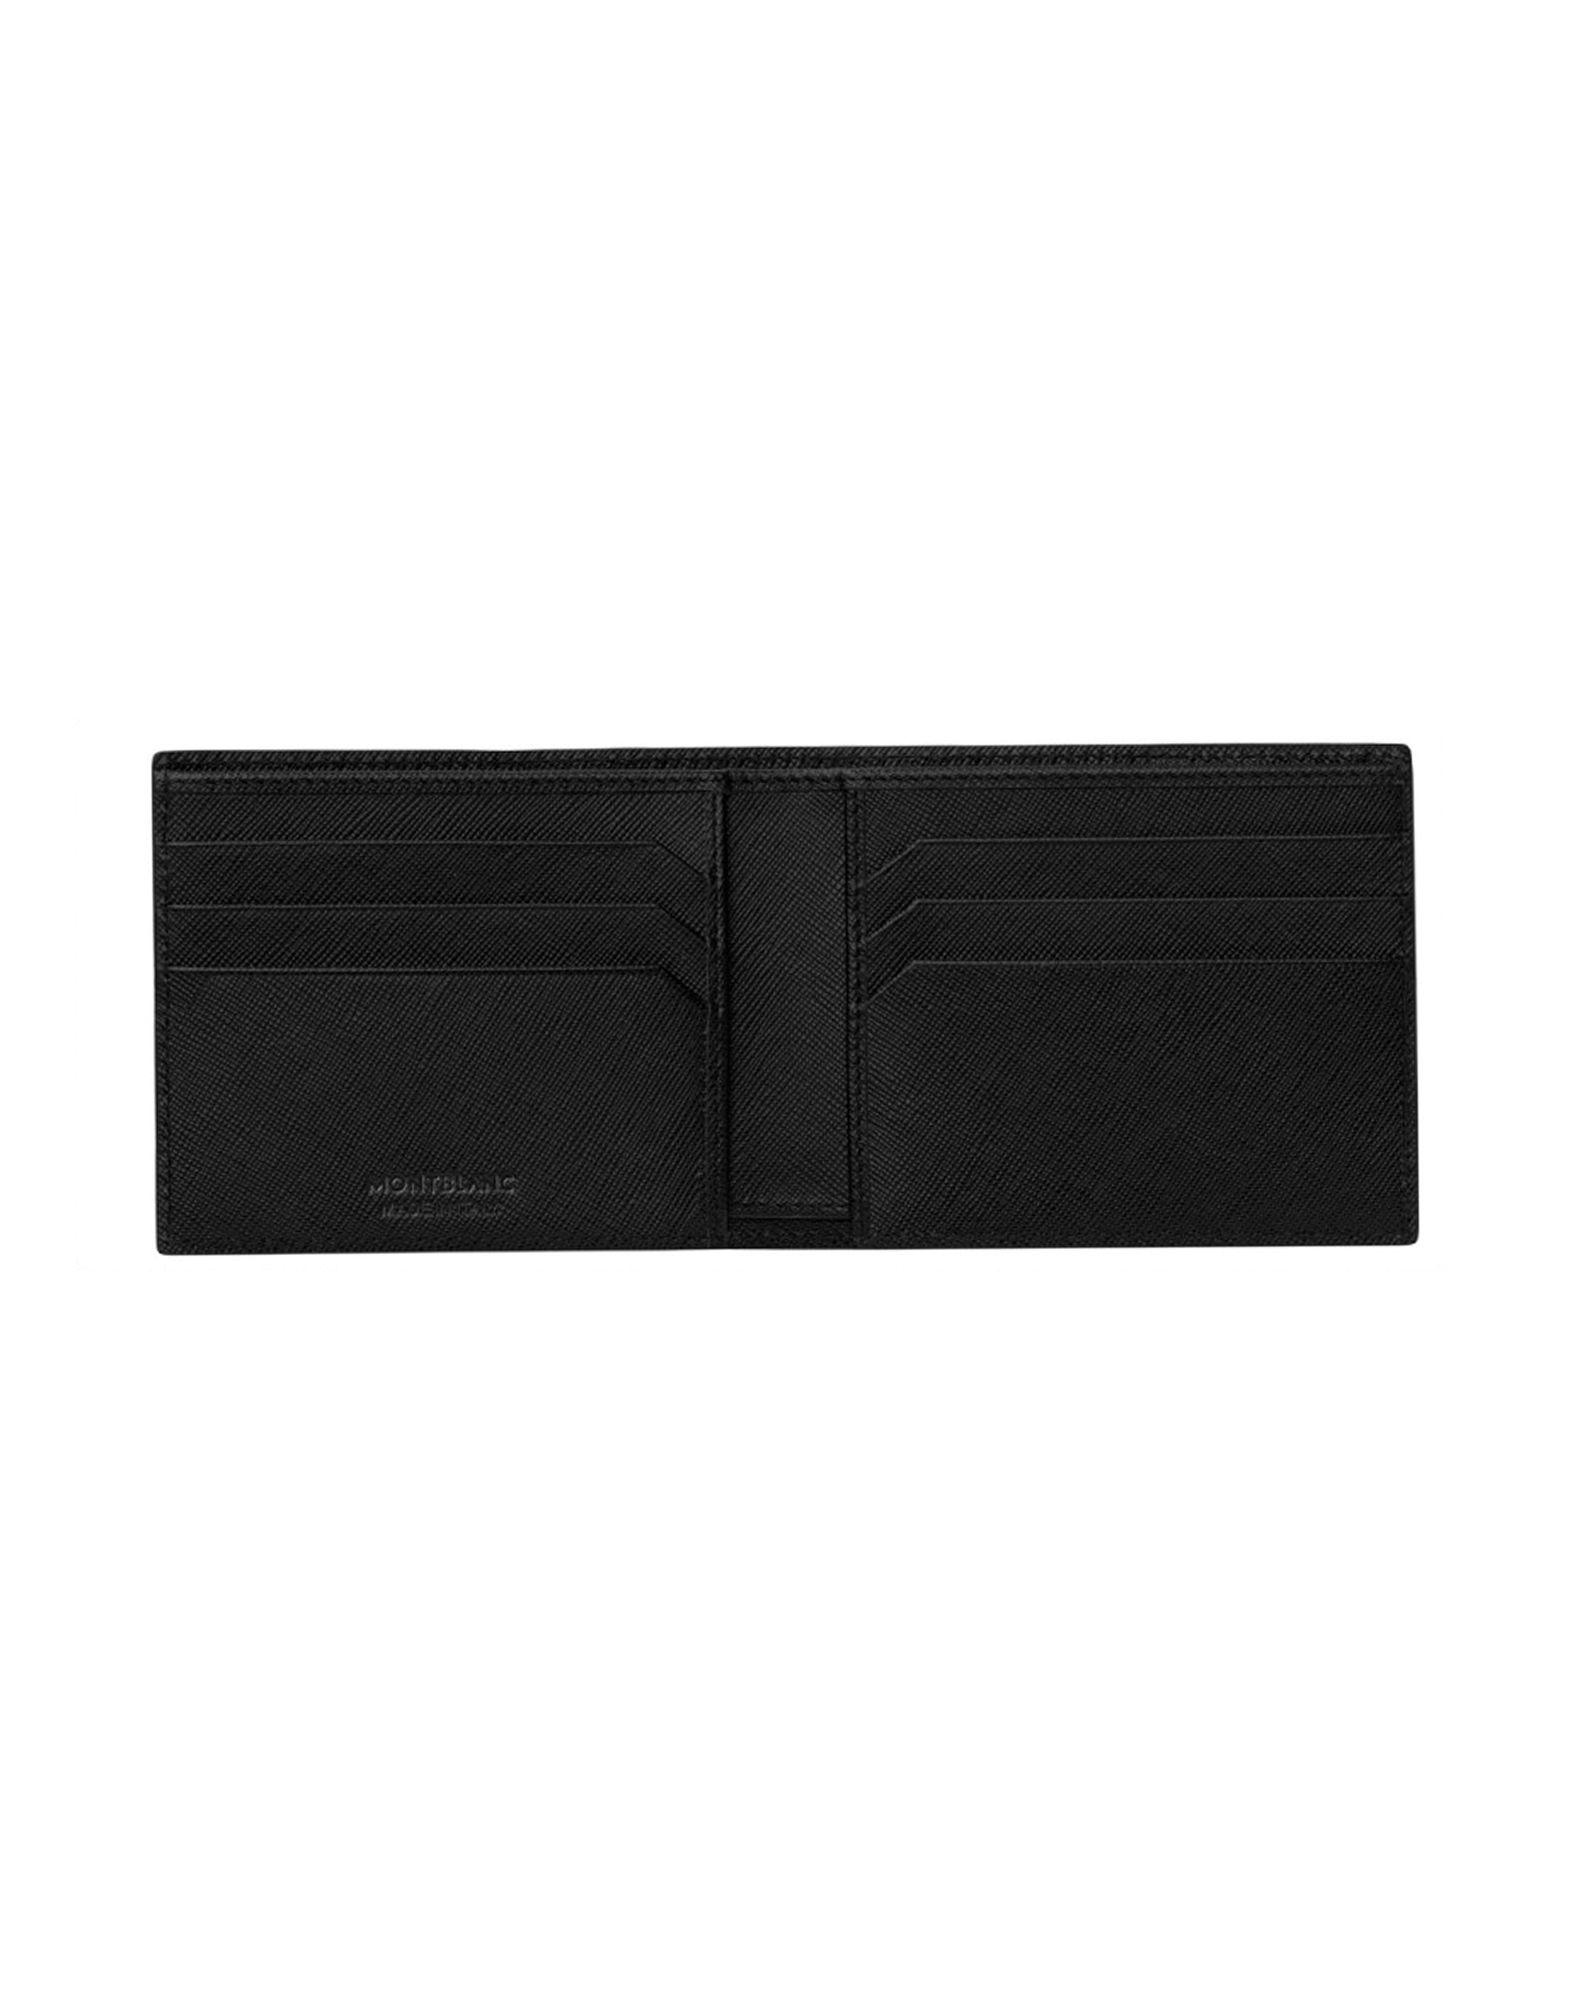 Montblanc Leather Sartorial Wallet 4cc With Coin Case Black for Men - Lyst